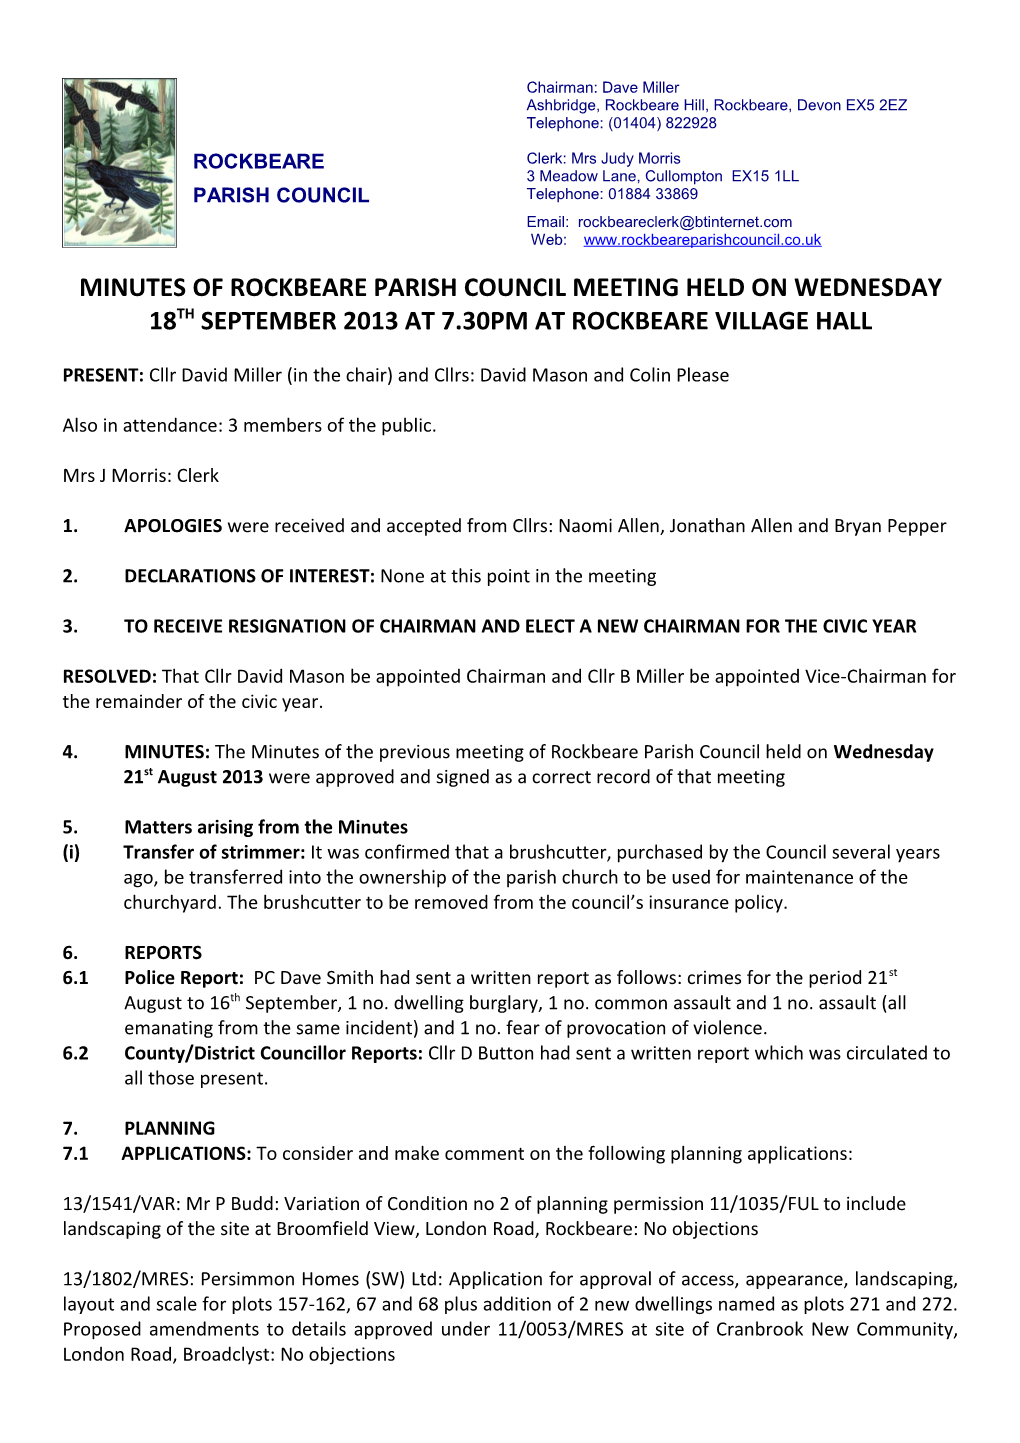 Minutes of Rockbeare Parish Council Meeting Held on Wednesday 18Th September 2013 at 7.30Pm